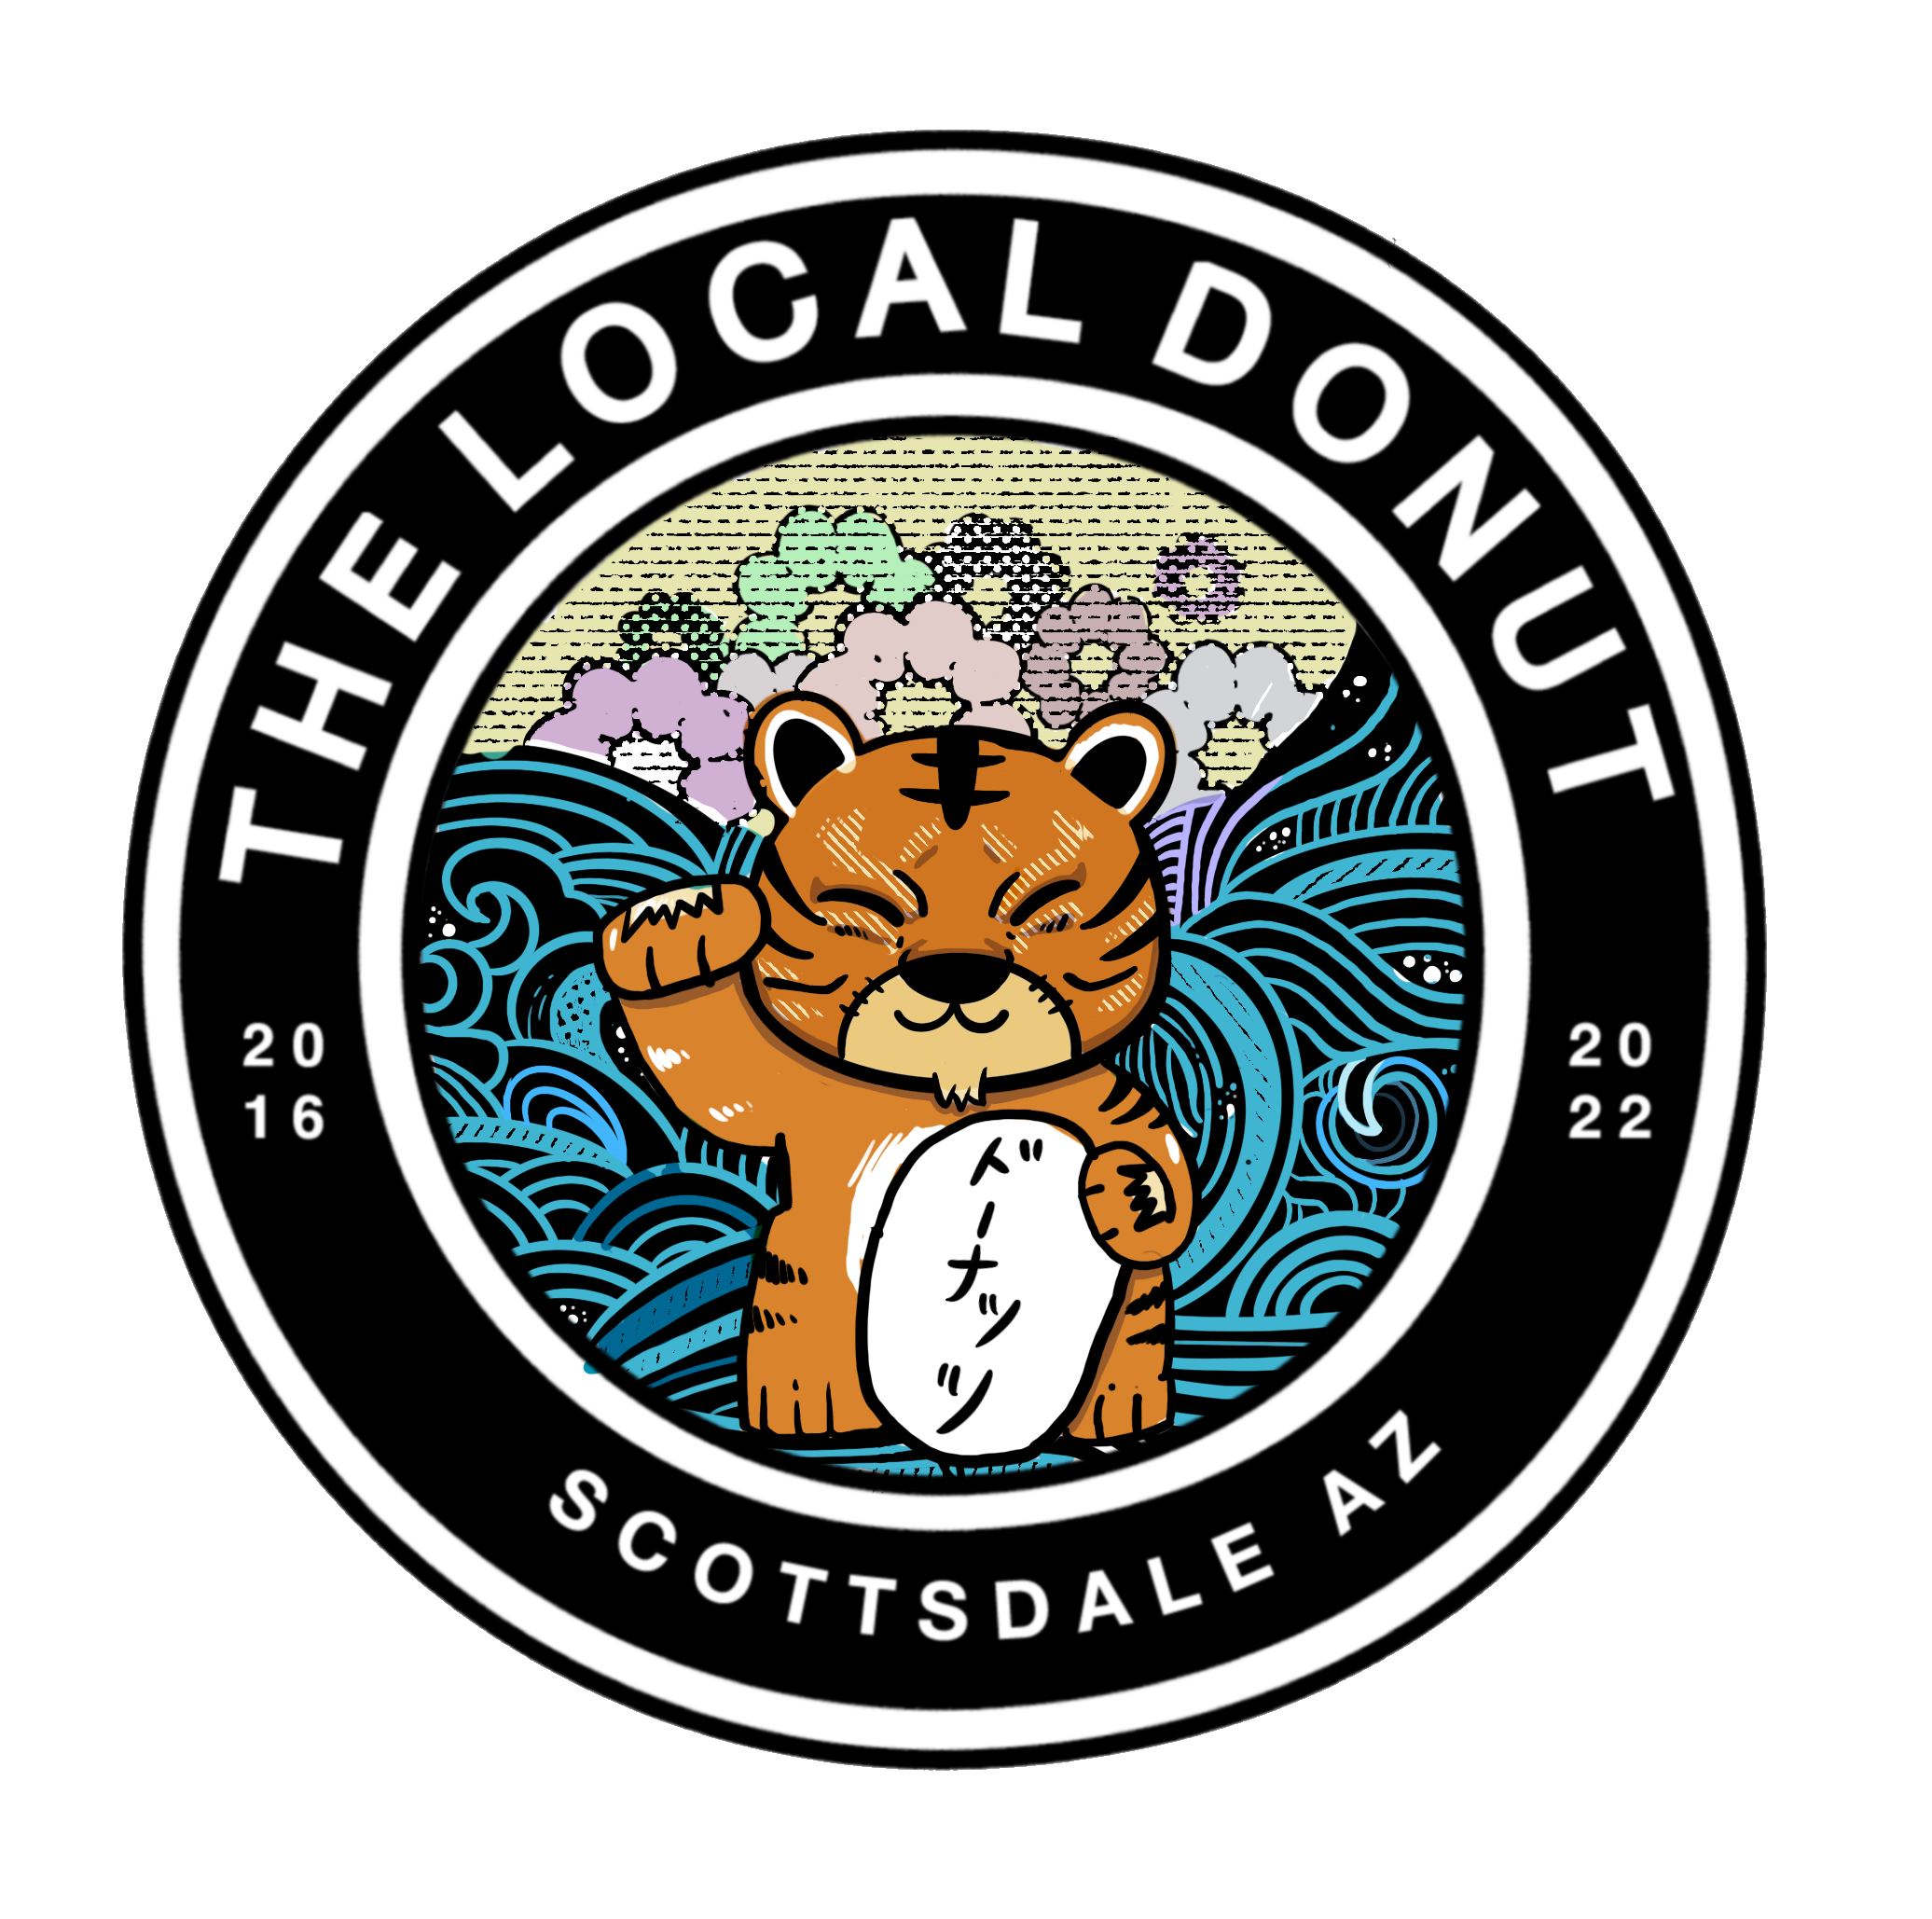 The Local Donut